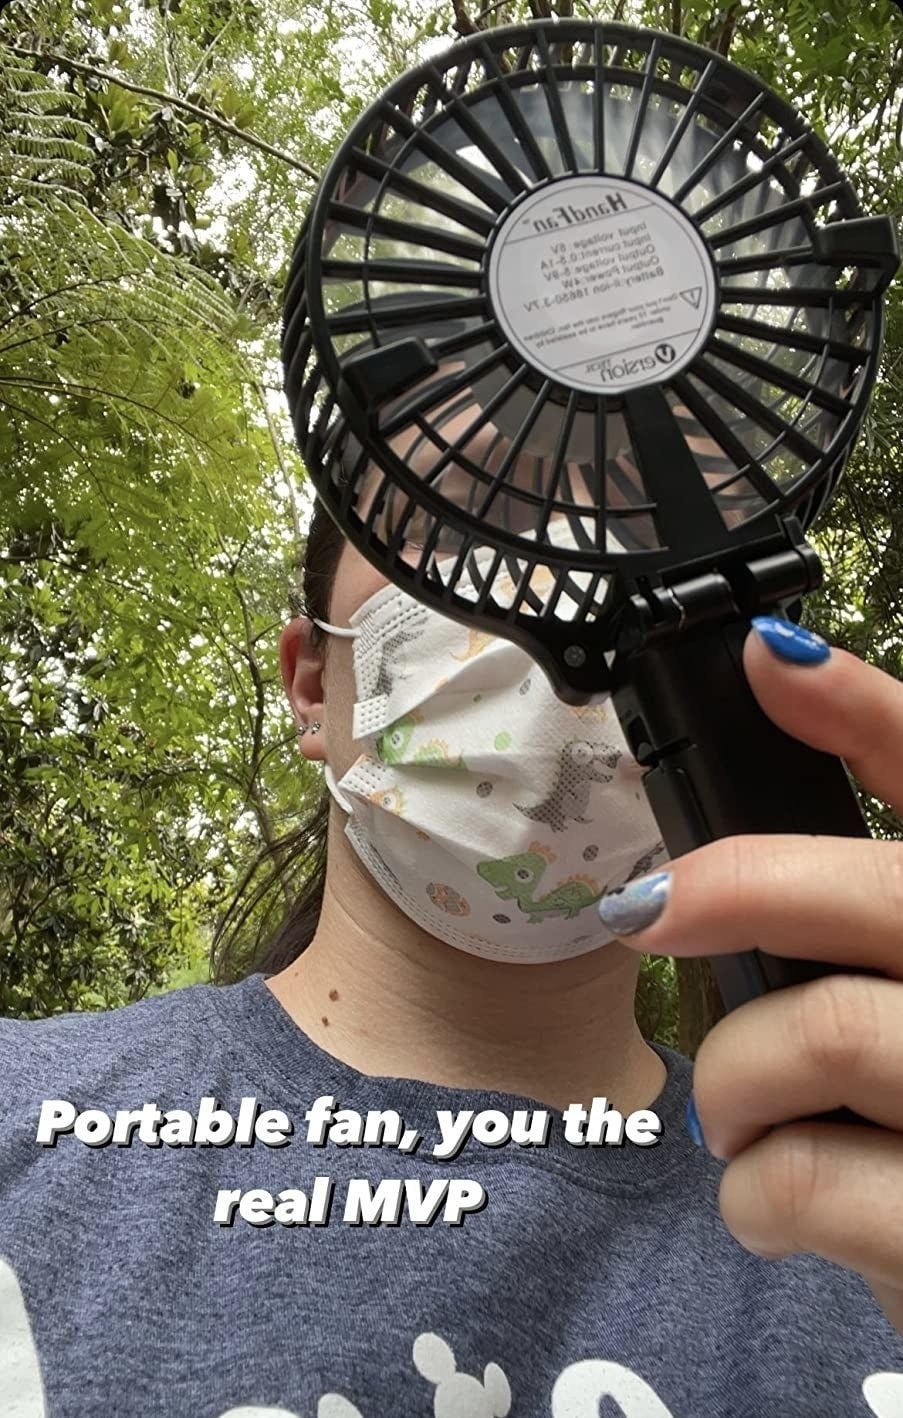 Person holding a portable fan near their face, wearing a mask and t-shirt, with trees in the background. Text on image: &quot;Portable fan, you the real MVP.&quot;